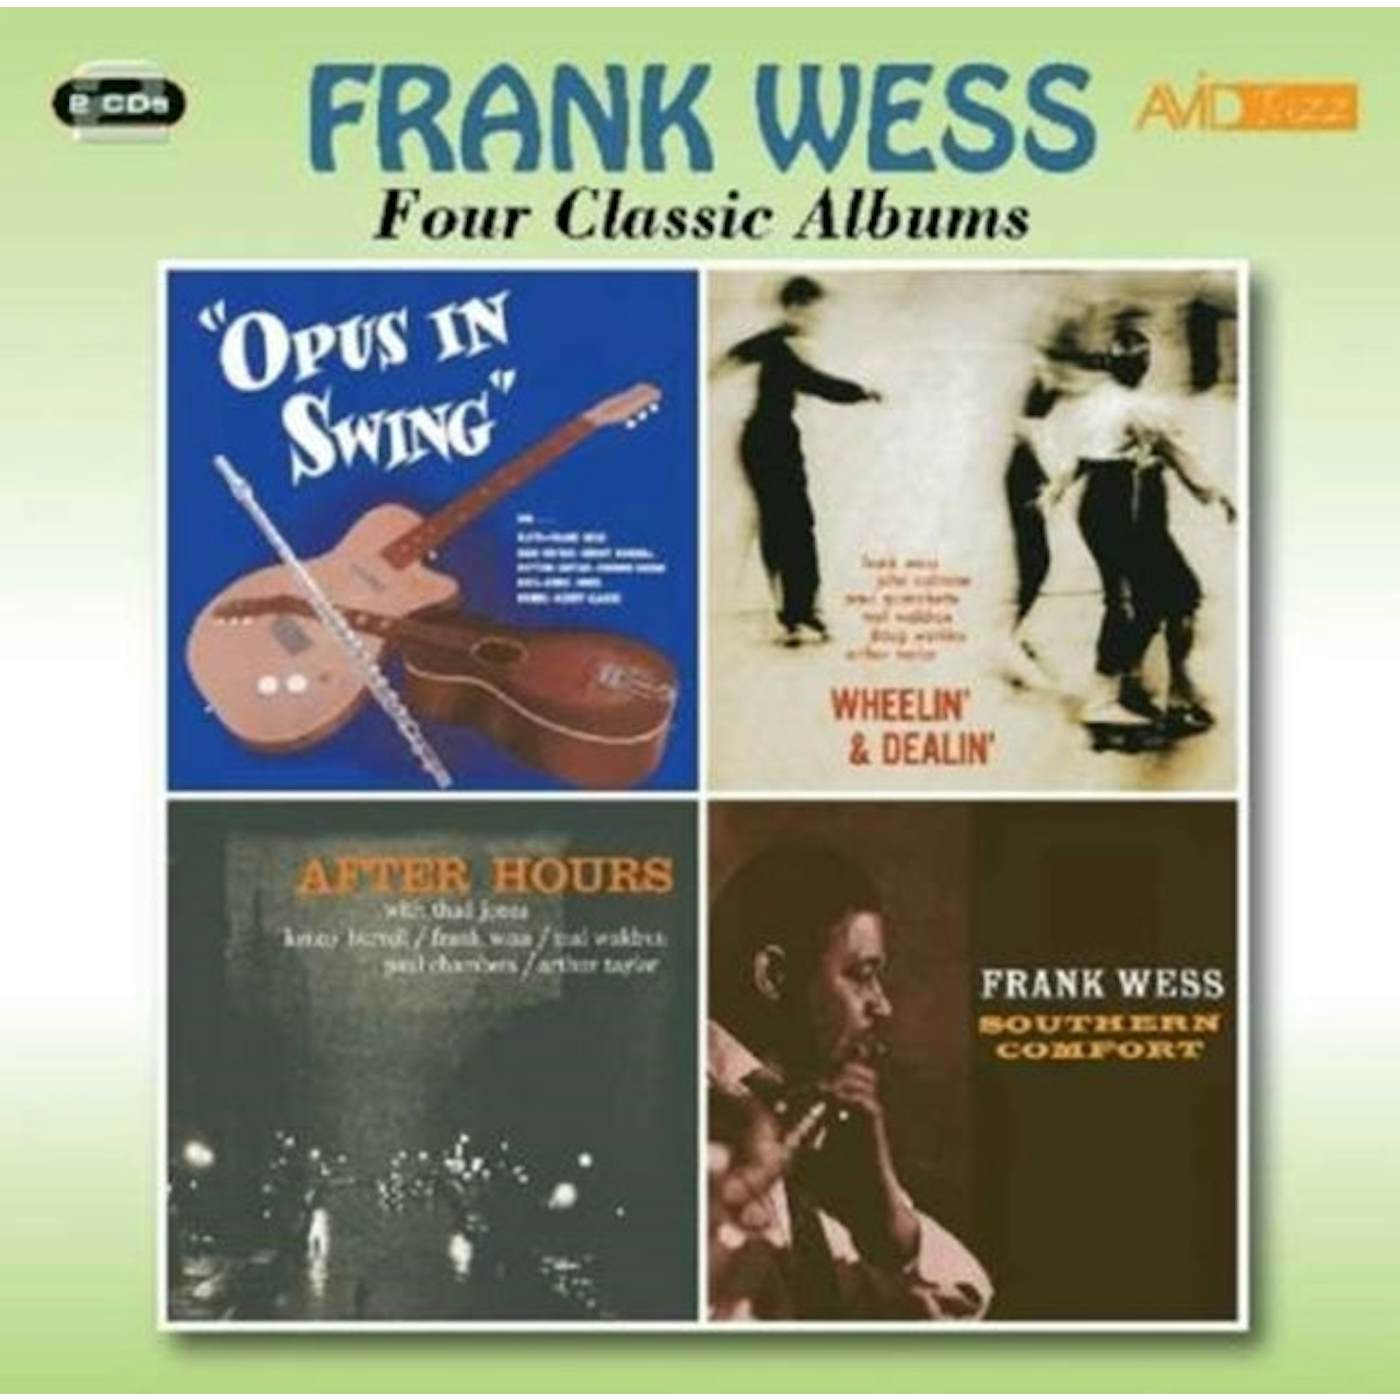 Frank Wess CD - Four Classic Albums (Opus In Swing / Wheelin' & Dealin' / After Hours / Southern Comfort)